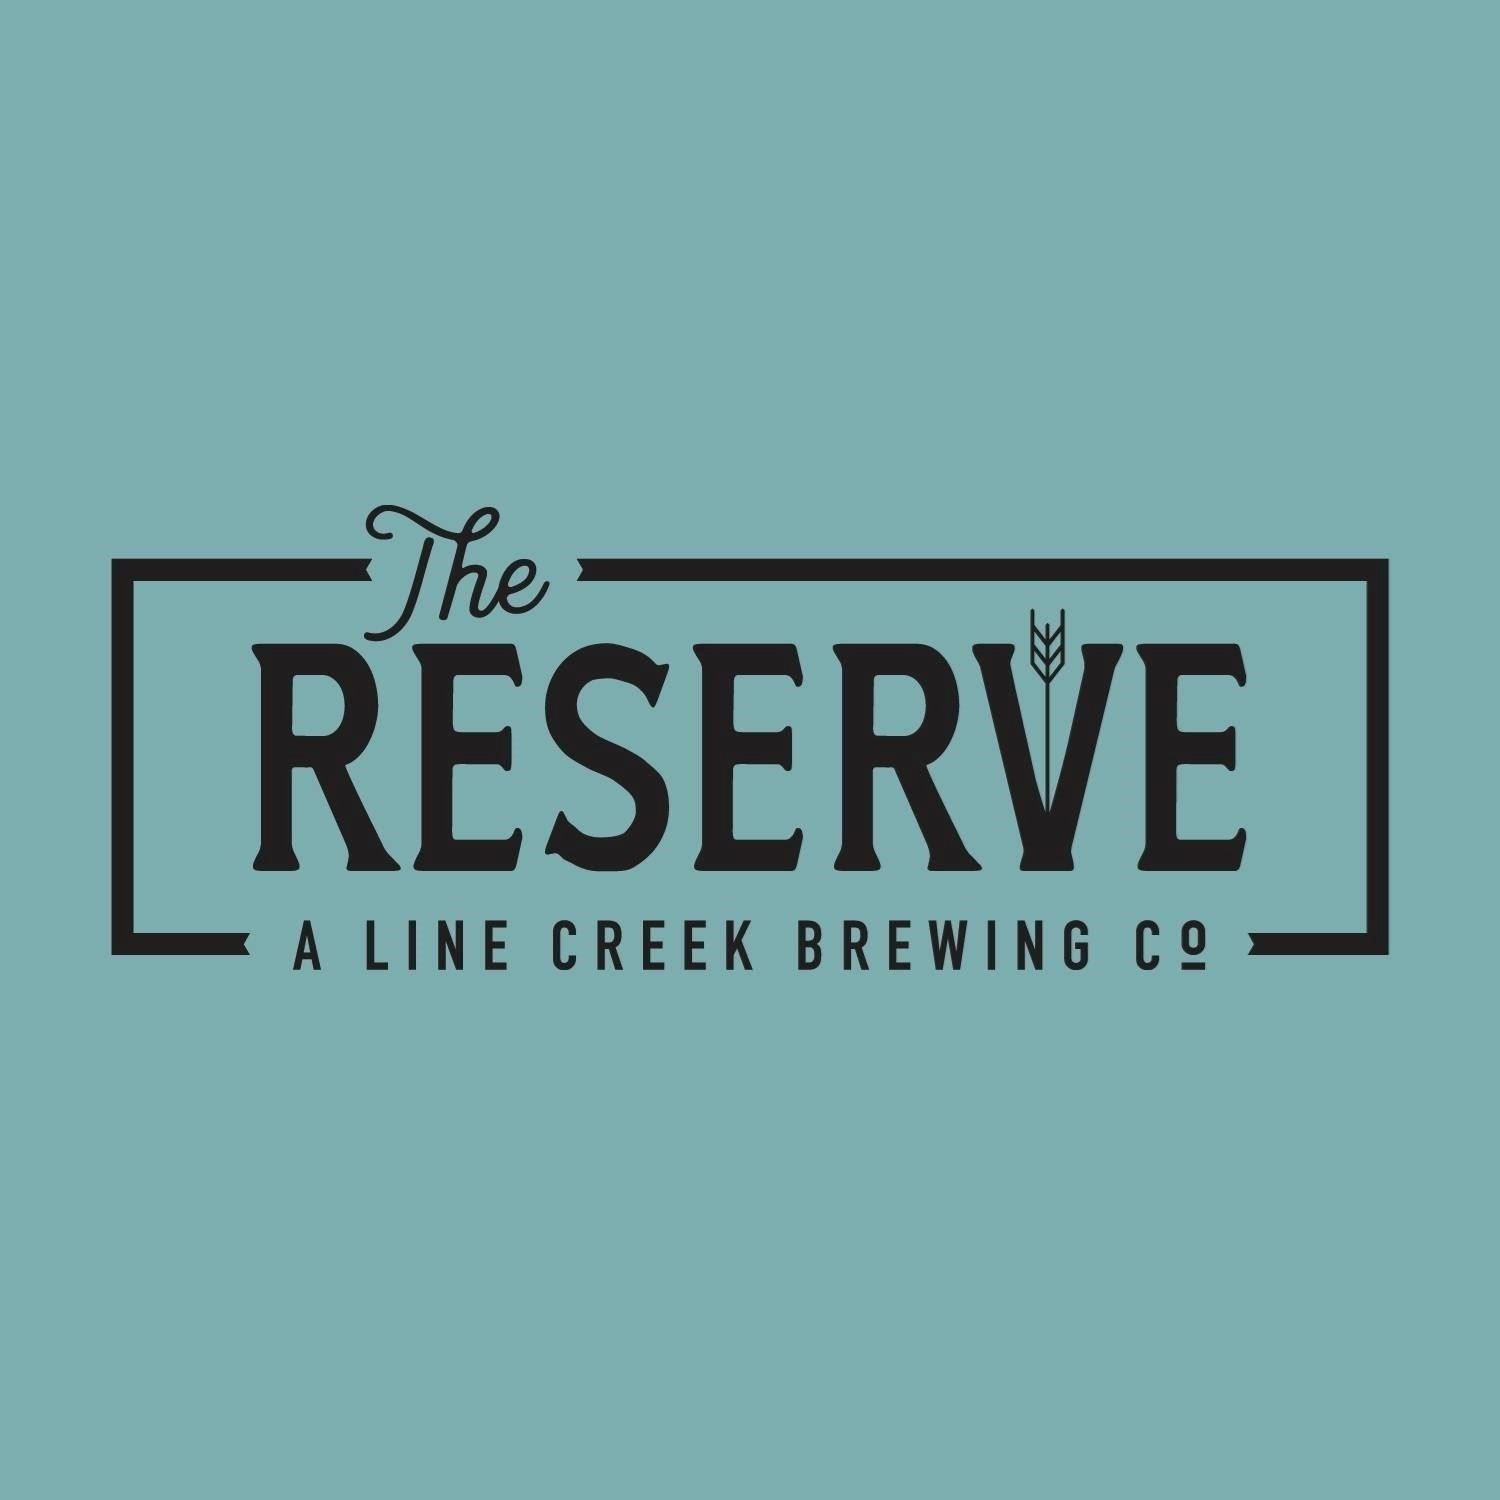 Line Creek Brewing: The Reserve